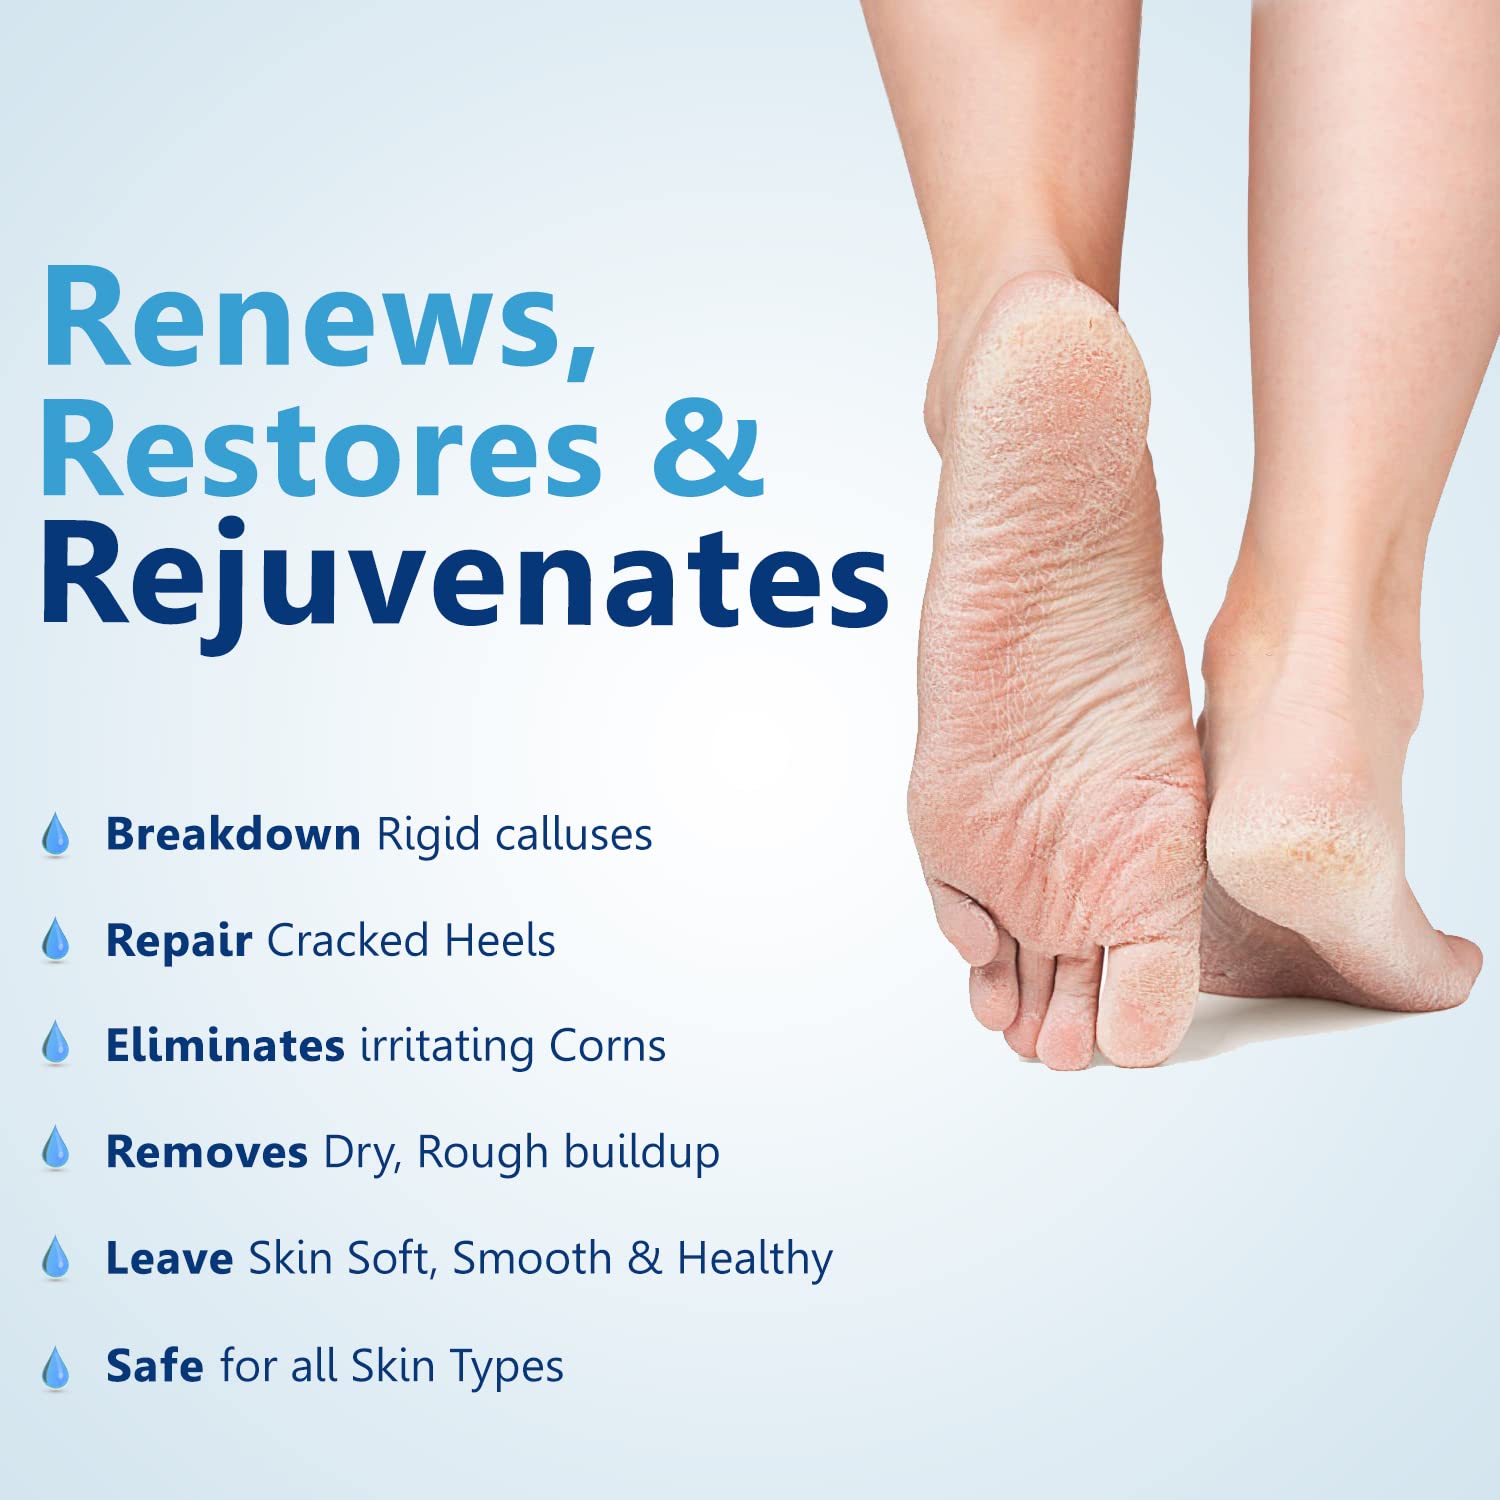 Dr Foot Callus Remover Gel Helps to remove Calluses and Corns also helps for Dry, Cracked skin with the Goodness of Urea, Tea Tree Oil, Coconut Oil, Aloe Vera Gel - 100ml